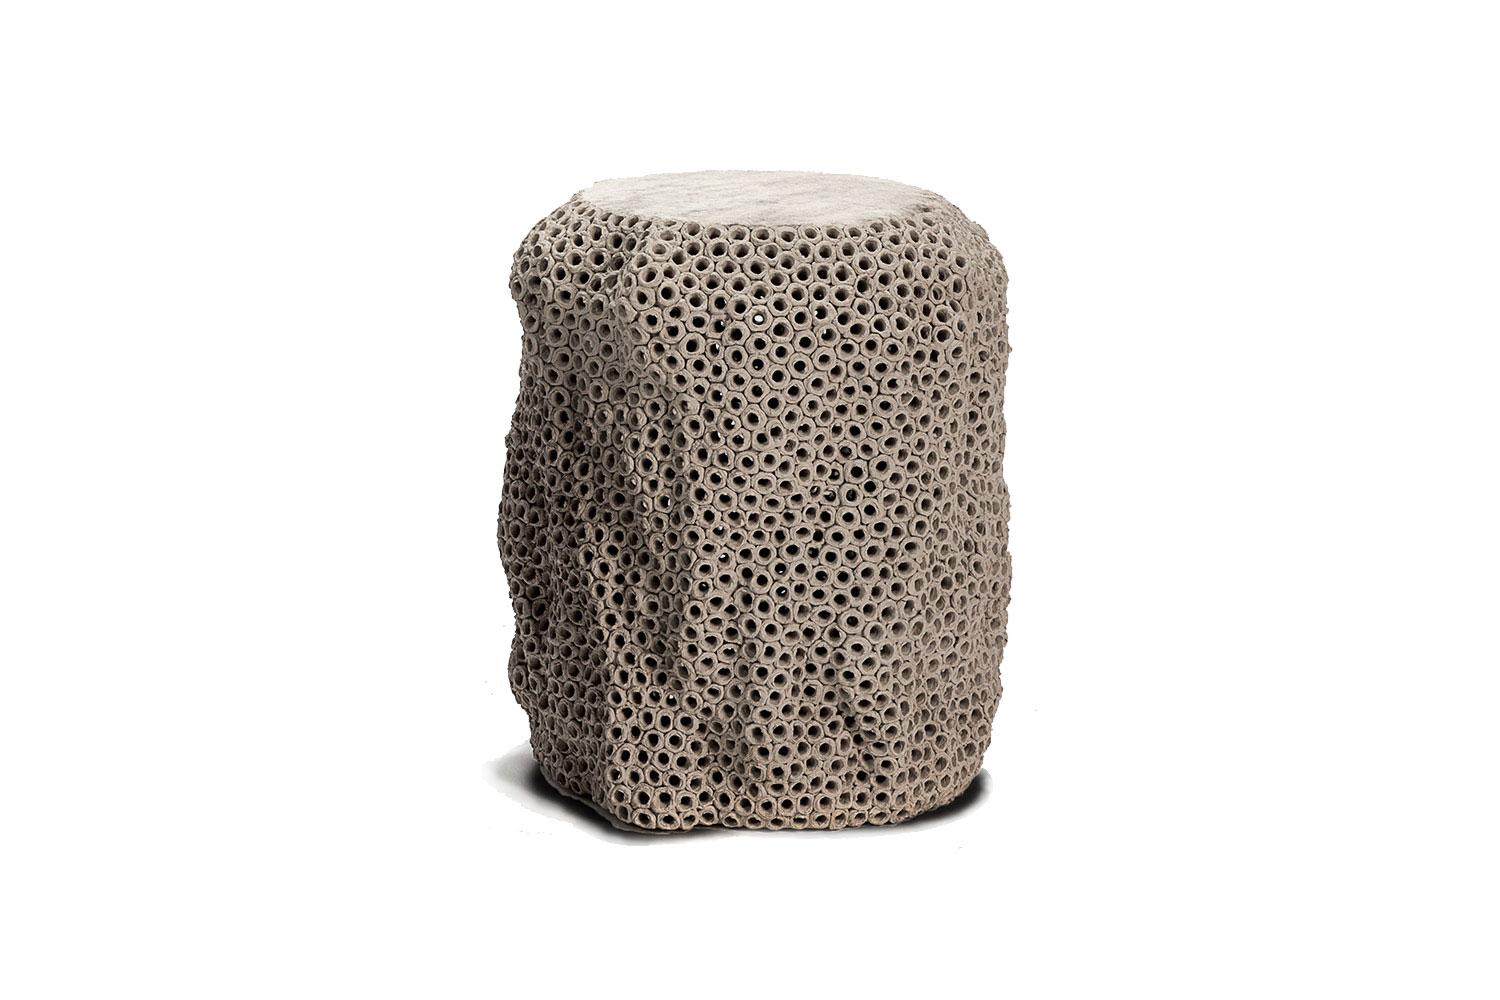 Inspired by nature pierced ceramic side tables by Gilles Caffier

These organic and functional hand built ceramic side tables have a hide top detail. Earthenware base finish in linen color.

Renowned for his unique & limited edition pieces,